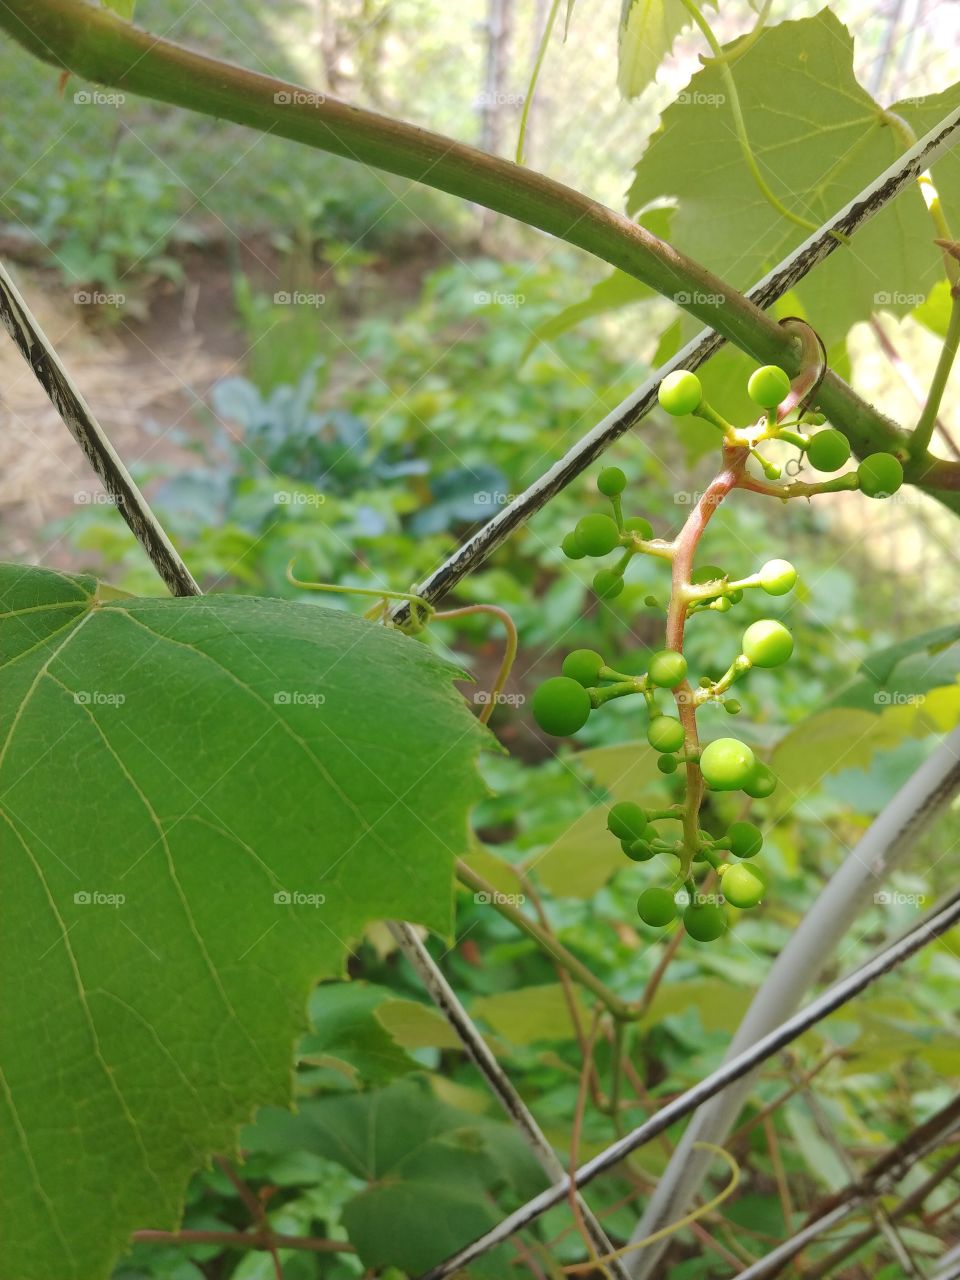 most adorable green baby grapes growing in this years beautiful summer garden in new york!